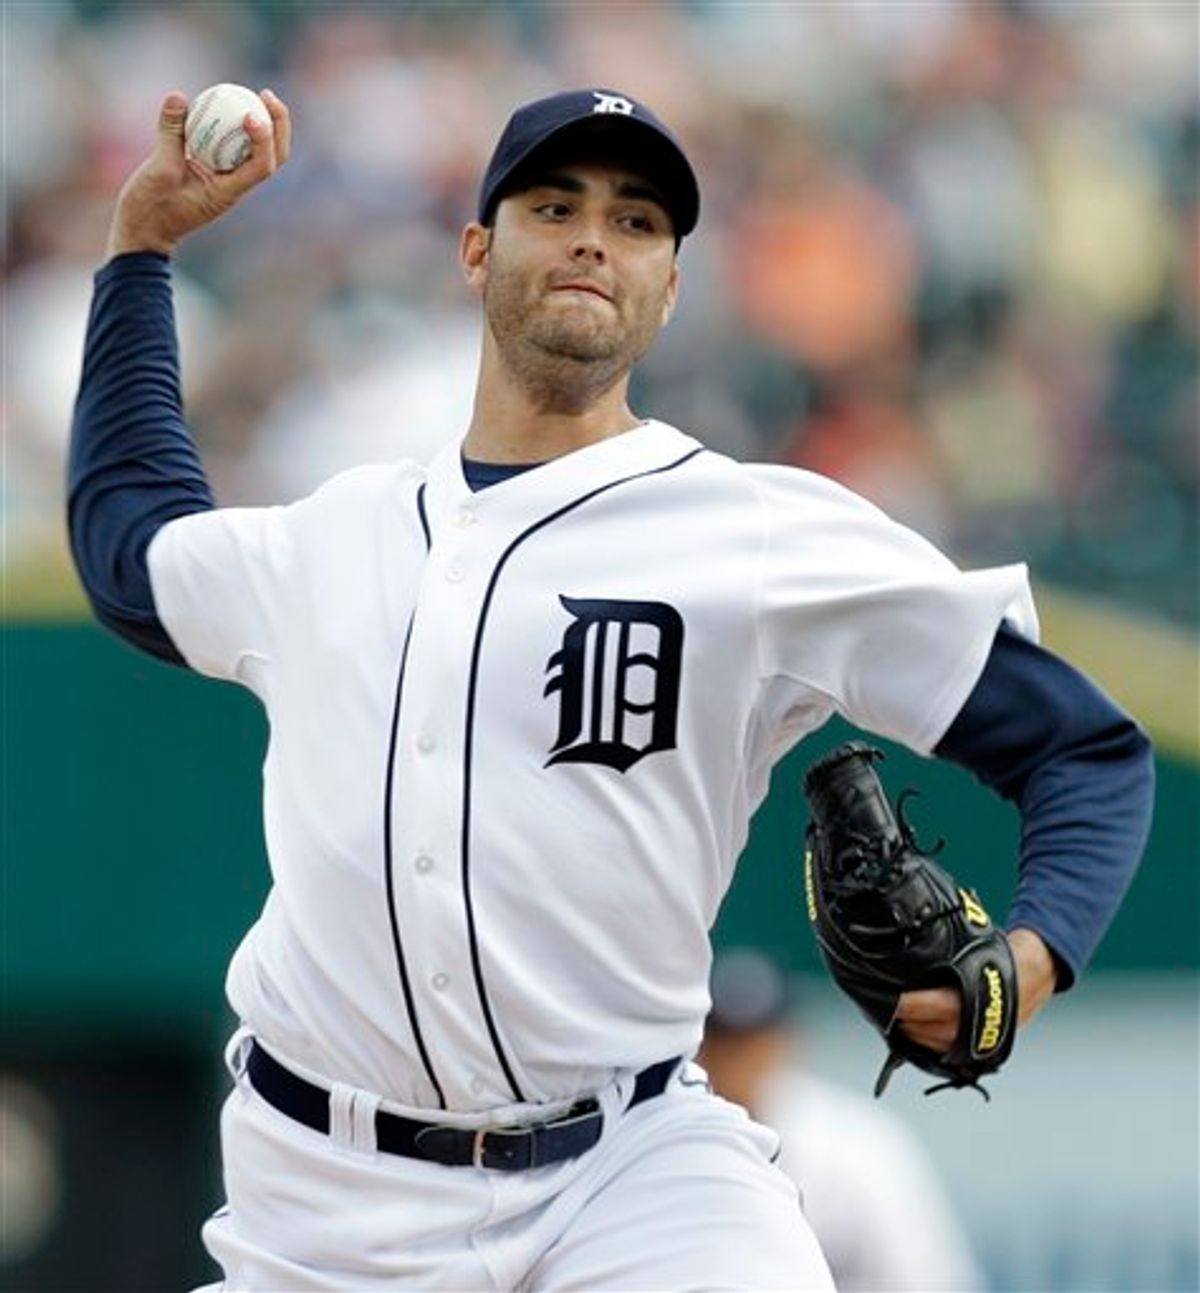 Detroit Tigers pitcher Armando Galarraga throws against the Cleveland Indians in the first inning of a baseball game in Detroit Wednesday, June 2, 2010. (AP Photo/Paul Sancya) (AP)